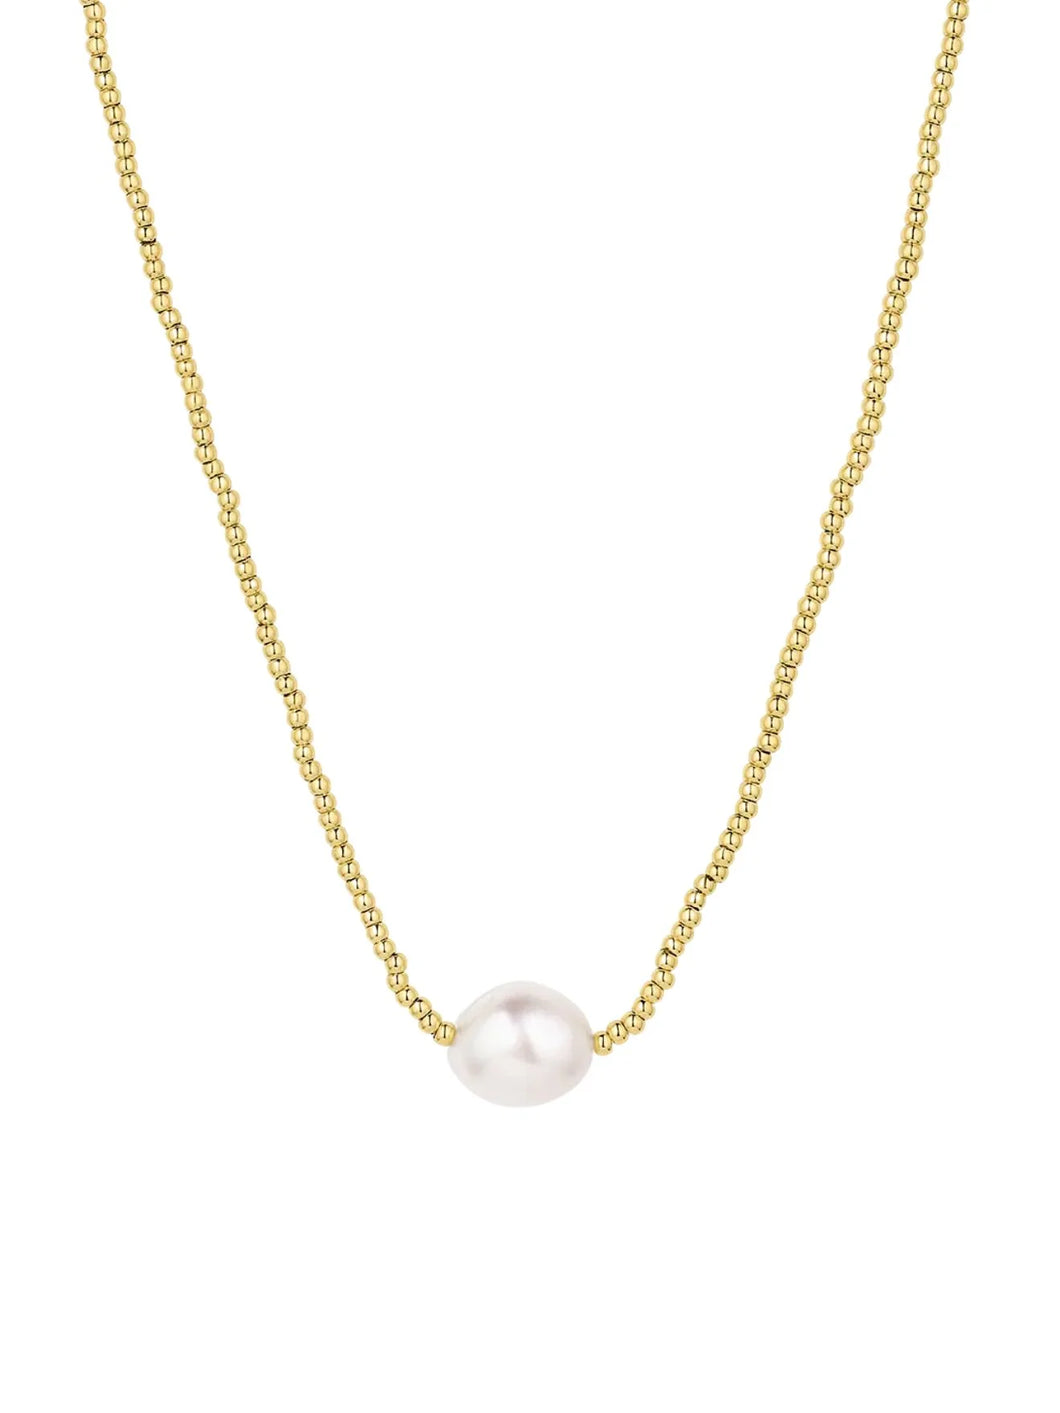 GOR Phoebe Pearl Necklace